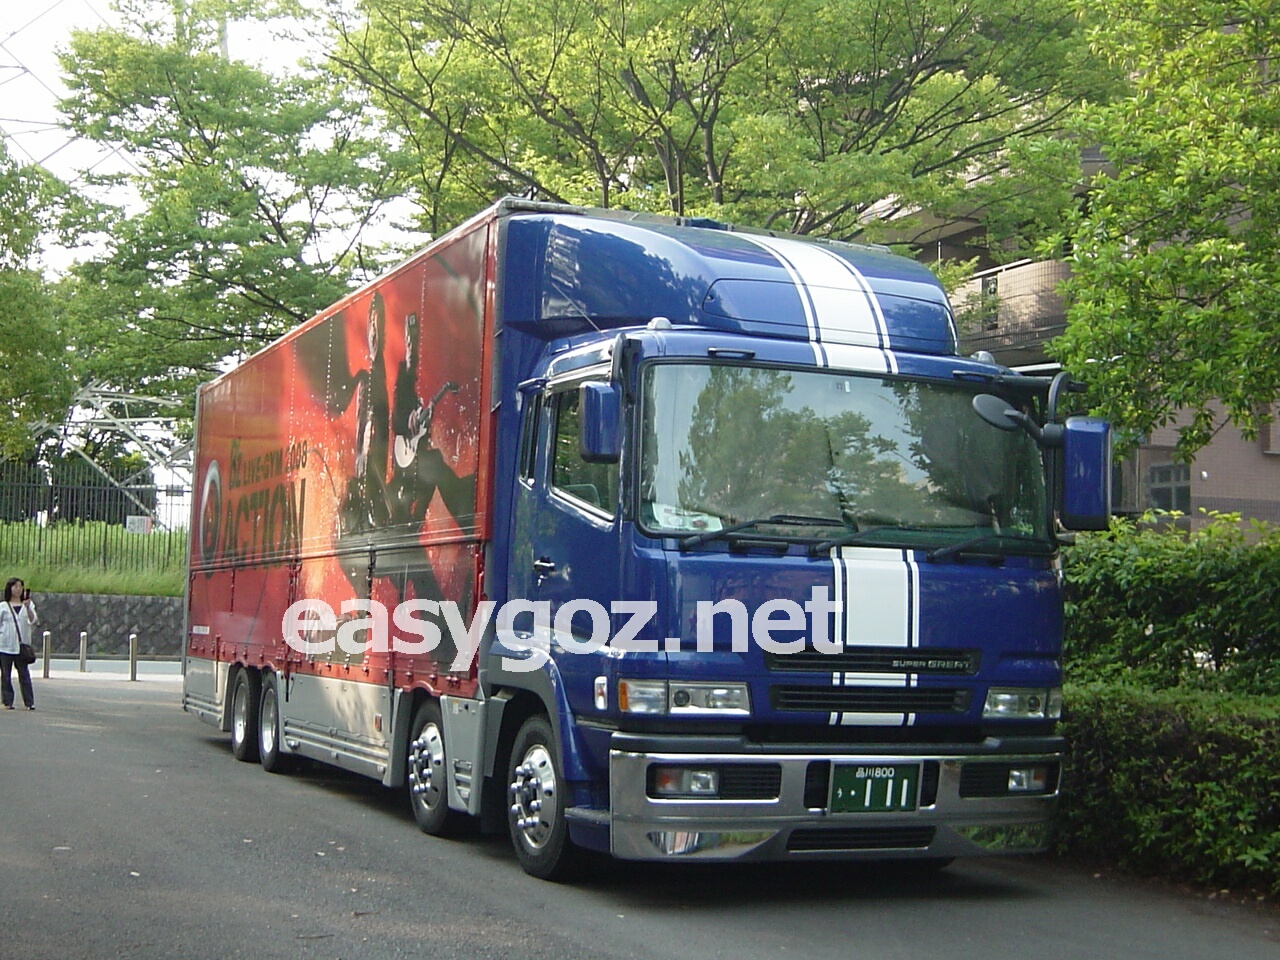 B'z LIVE-GYM 2008 ”ACTION” 6/14 横浜アリーナ ライブレポ | easygo